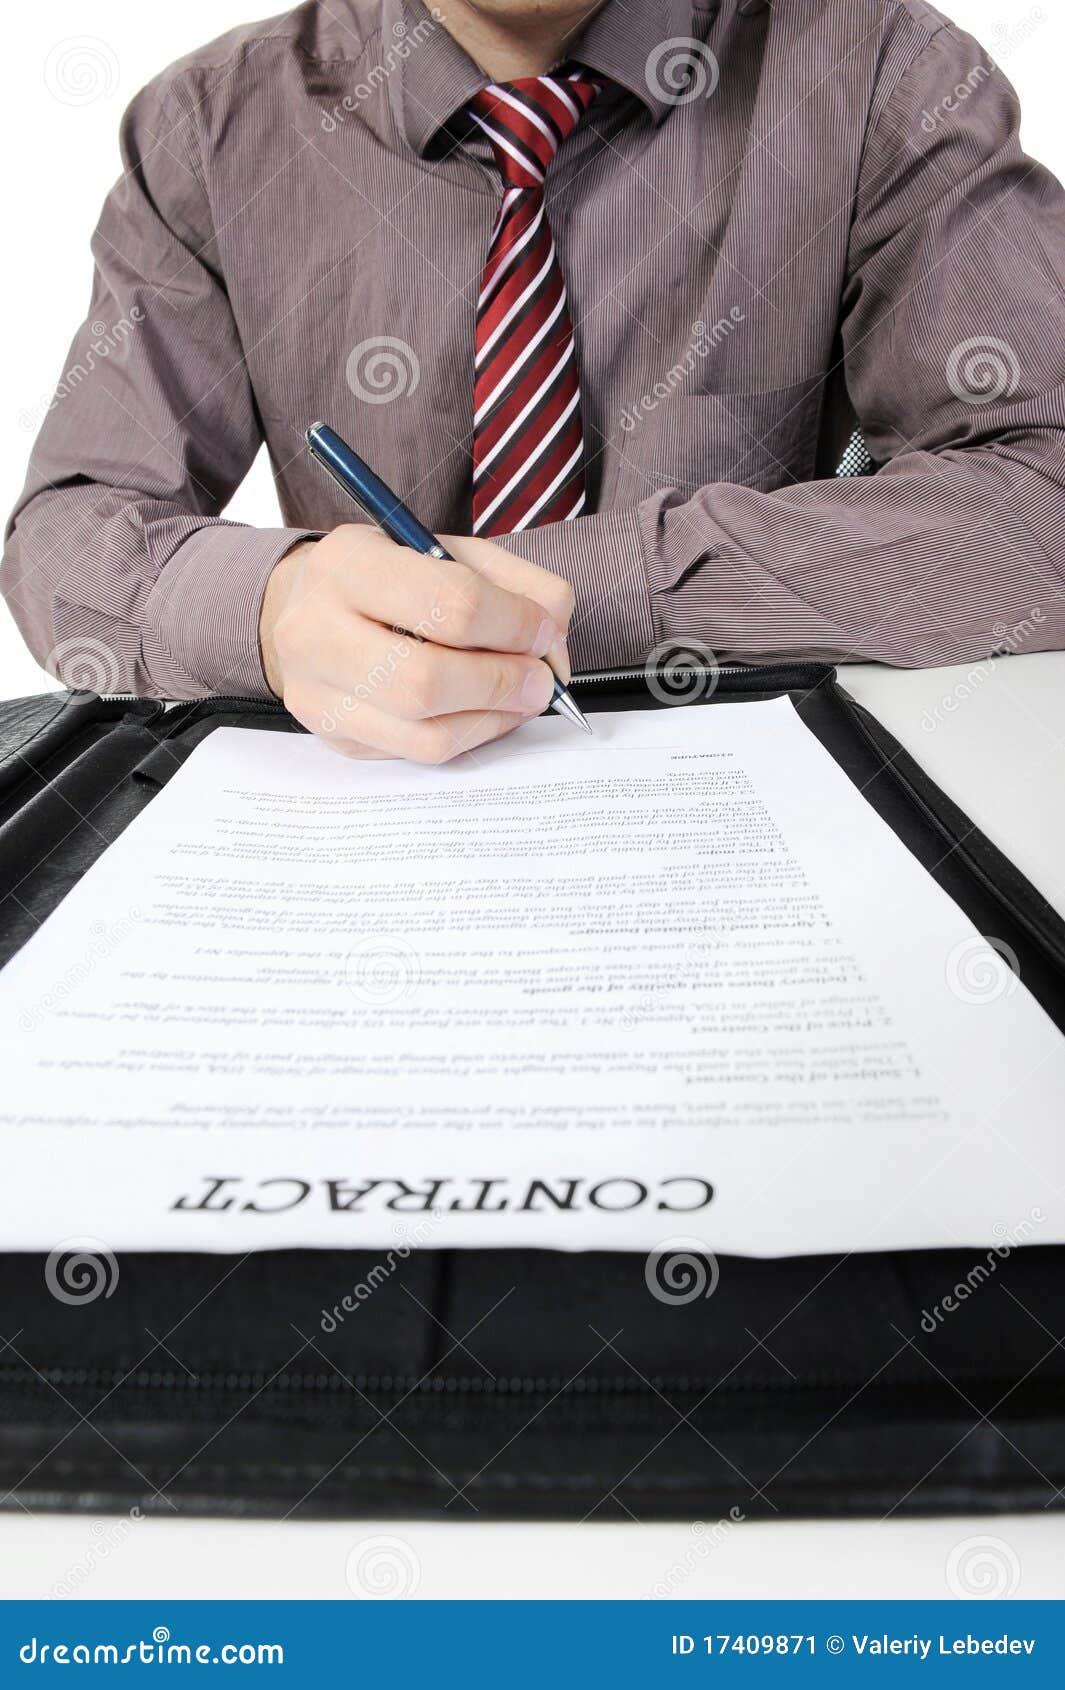 Businessman Signs a Contract Stock Image - Image of desk, caucasian